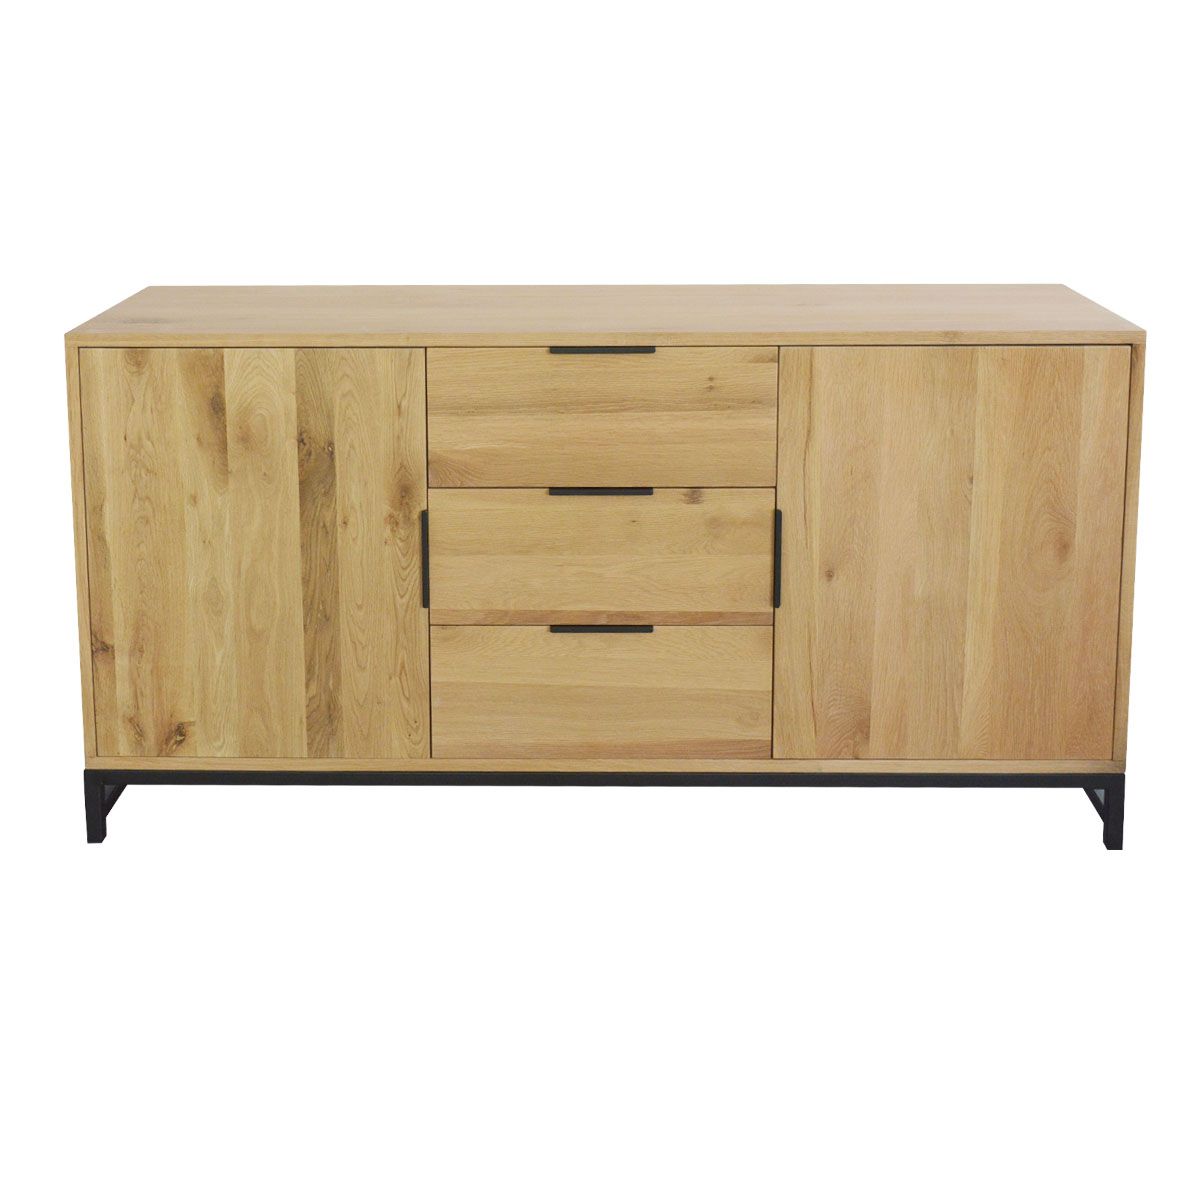 Details About Detroit Industrial Loft Oak Buffet Sideboard Storage Cabinet  Cupboard Dresser For Contemporary Style Wooden Buffets With Two Side Door Storage Cabinets (View 23 of 30)